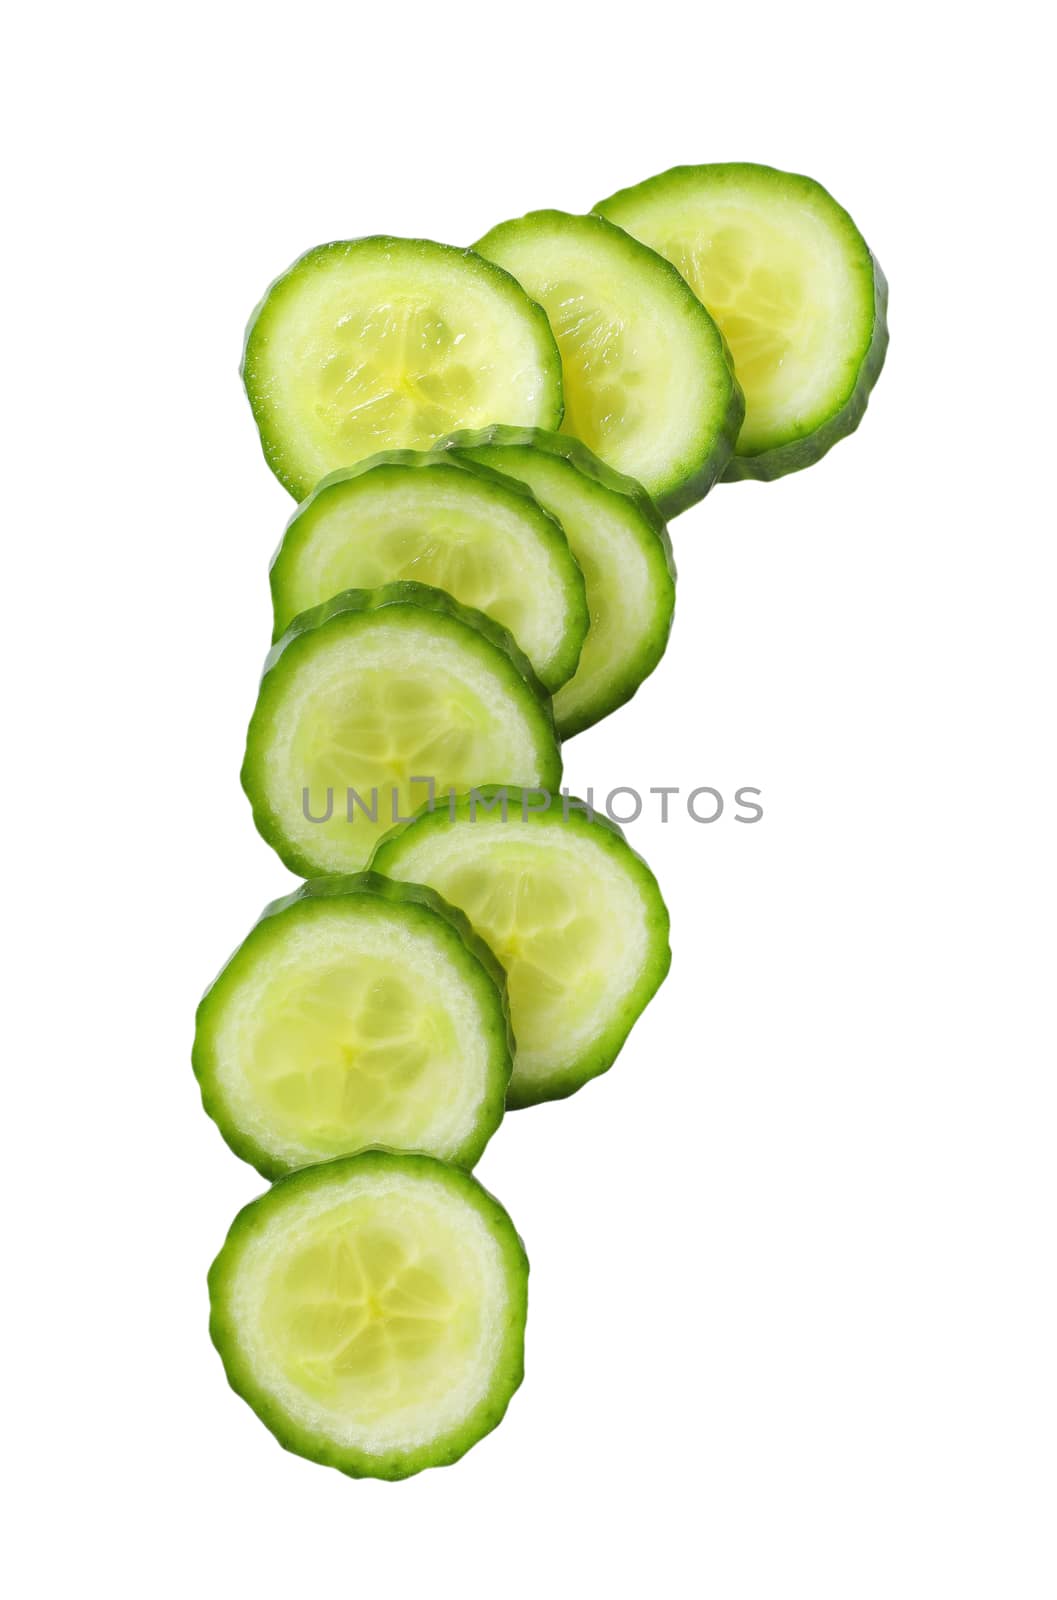 slices of green cucumber on white background